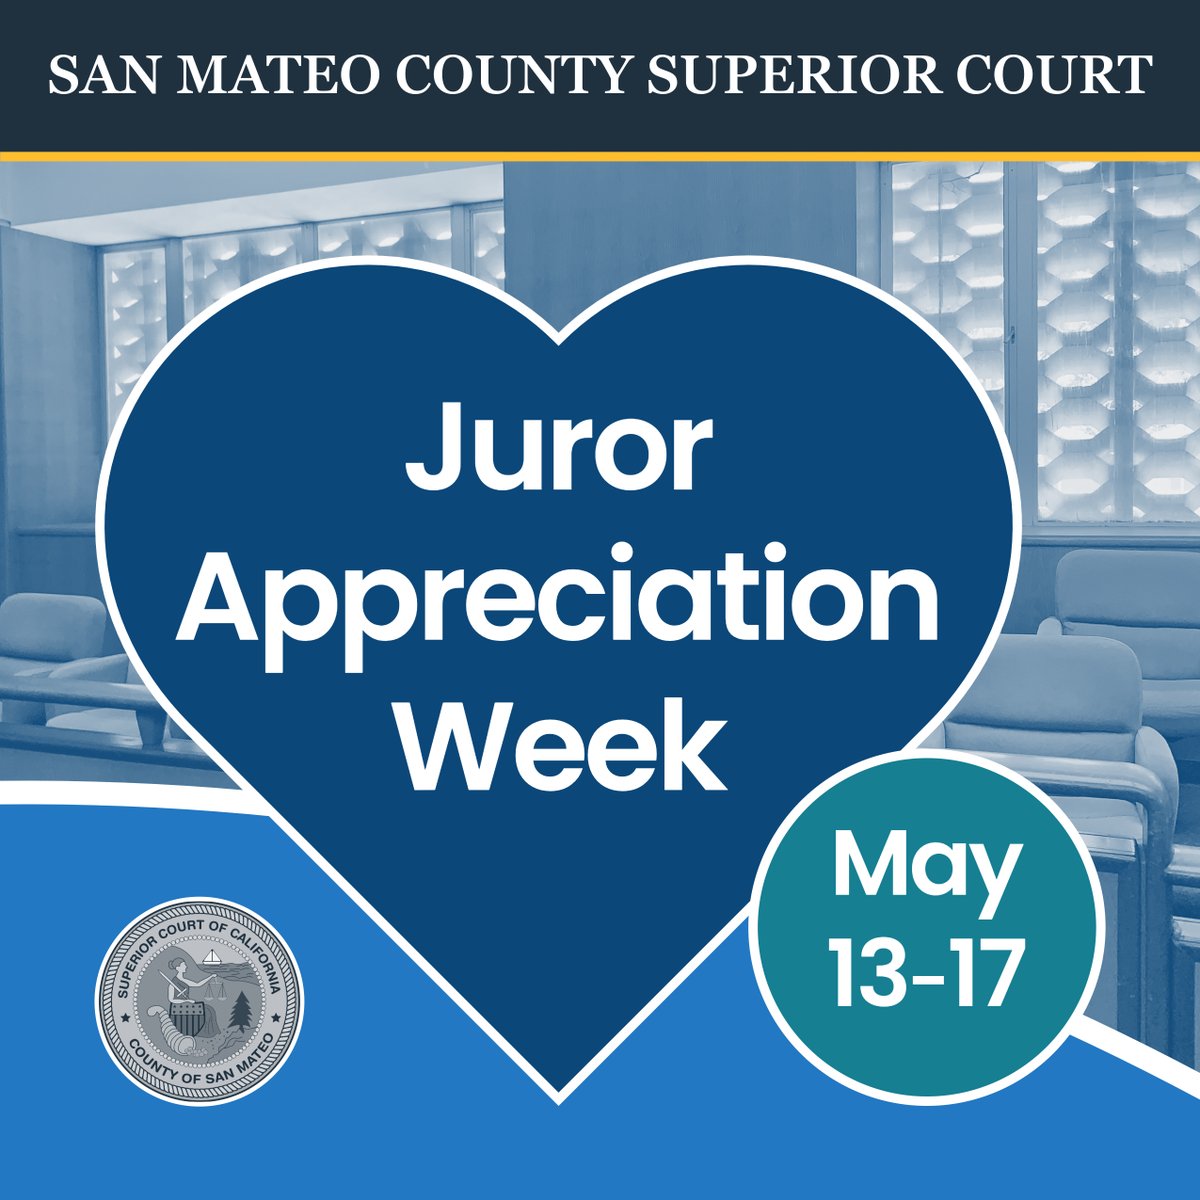 San Mateo County Superior Court celebrates Juror Appreciation Week to recognize service & participation of jurors in #SanMateoCounty. The Court calls approximately 1,000 jurors on a weekly basis. More here: sanmateo.courts.ca.gov/news/san-mateo…